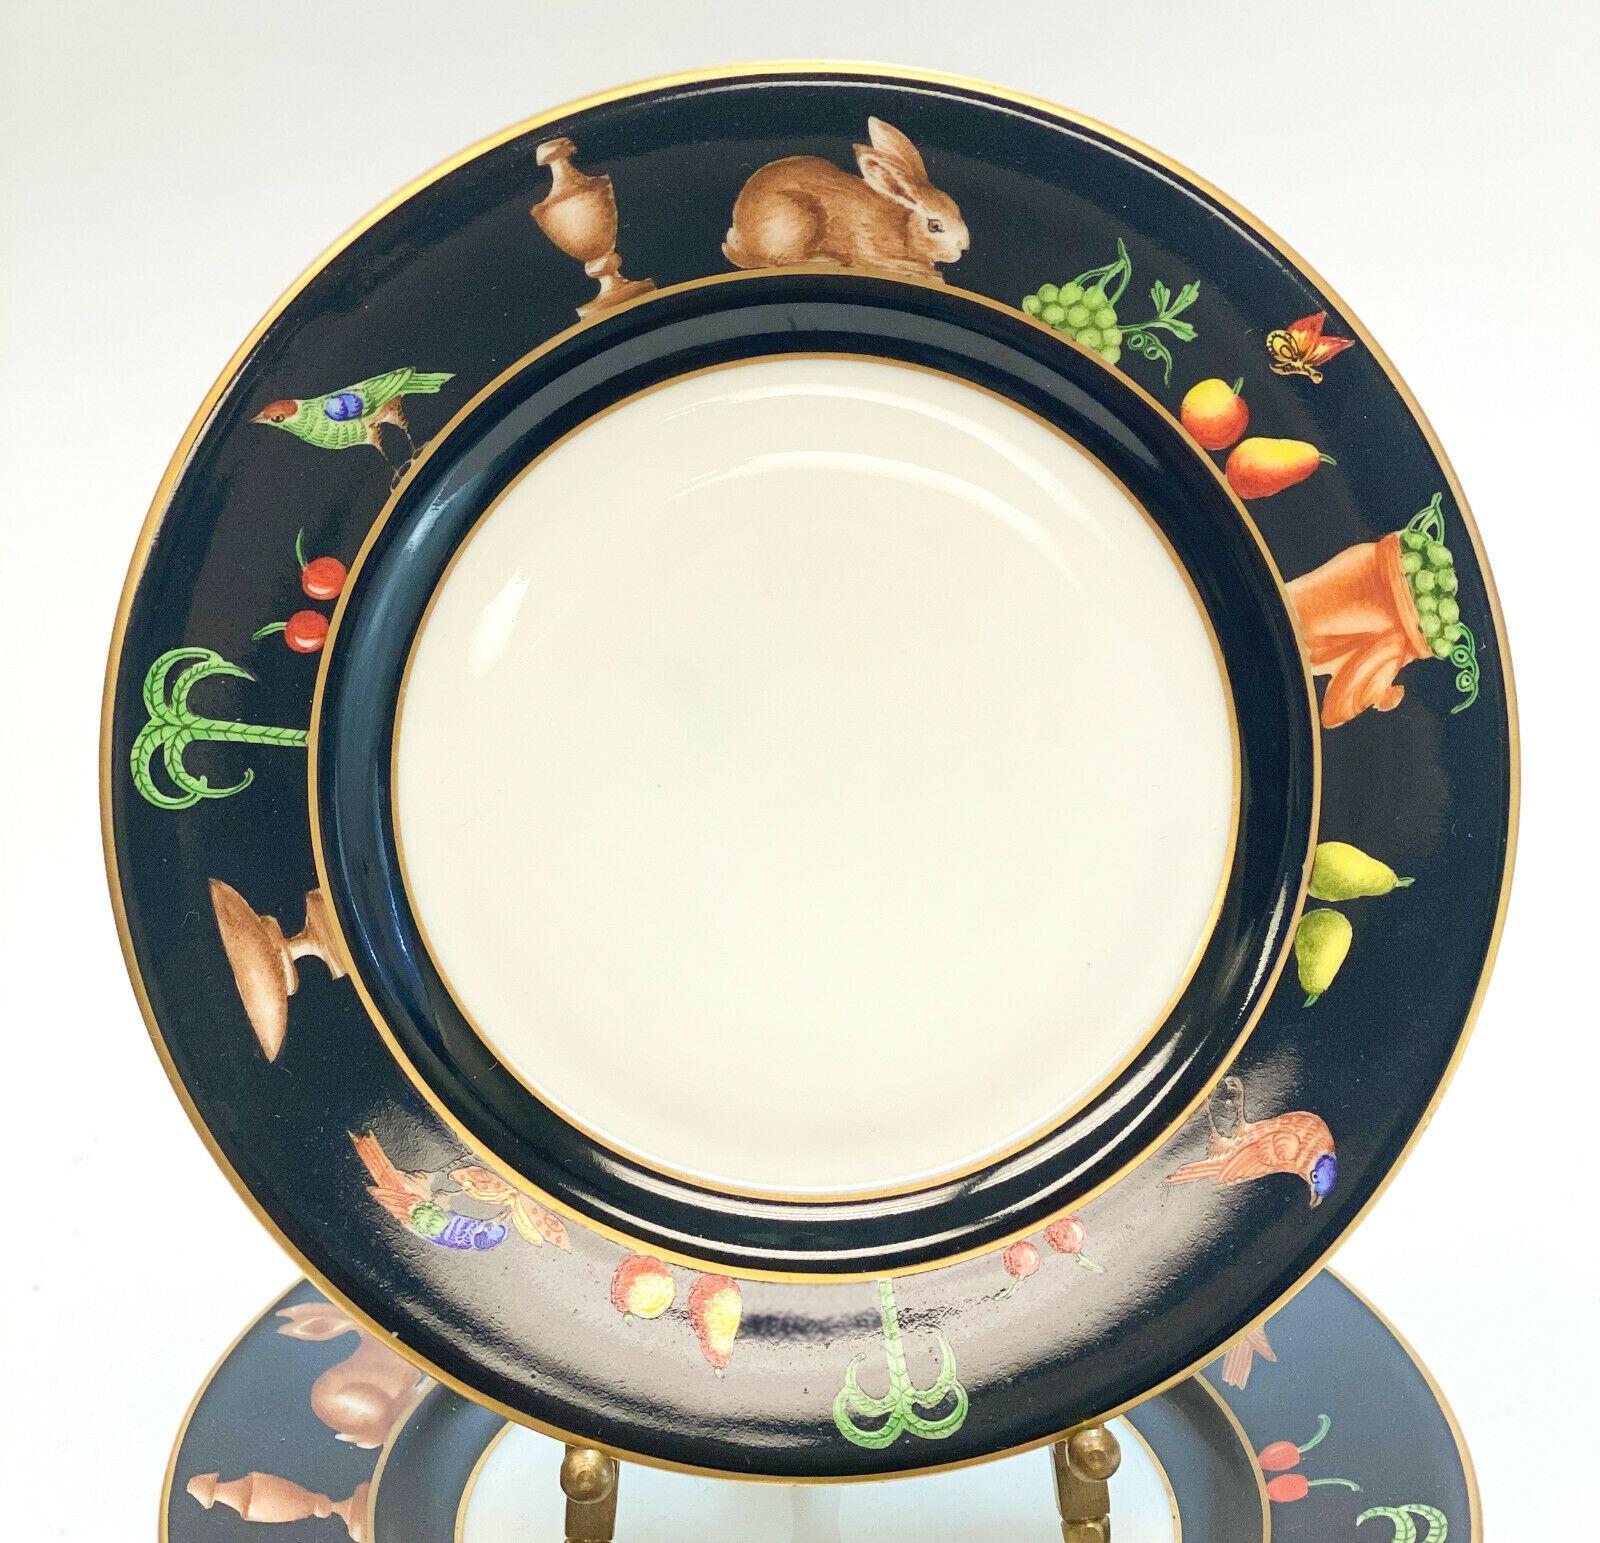 6 Tiffany Private Stock Le Tallec porcelain decorative saucers in Black Shoulder . Beautiful hand painted tropical birds, trees, fruits, and rabbits to a black and gilt ground. Tiffany Private Stock mark with the Le Tallec mark and artist initials